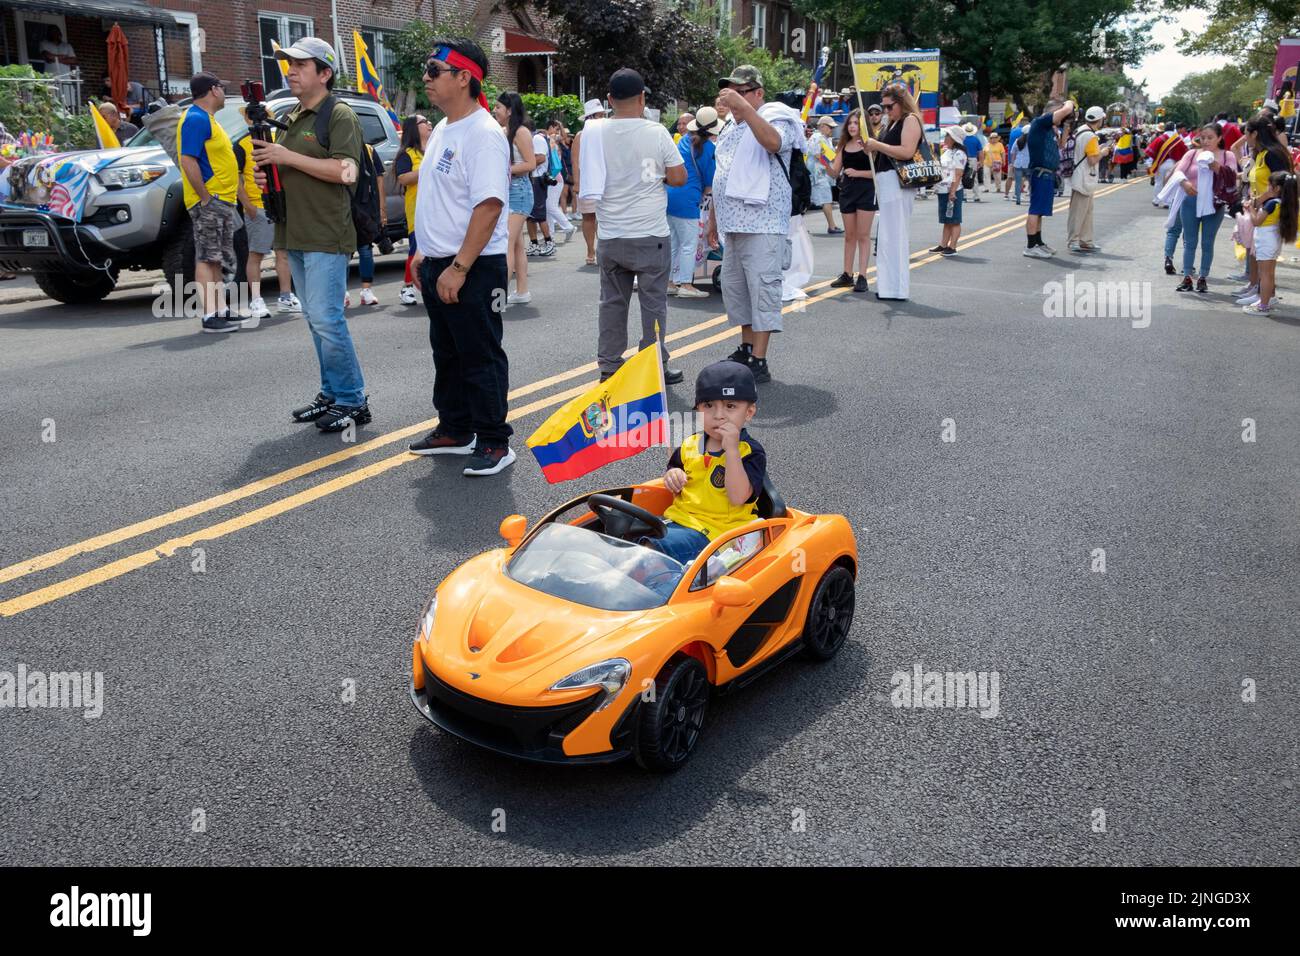 A young Ecuadorian boy rides his electric car on 69th Street just prior to the Ecuadorian Parade NYC 2022 in Jackson Heights, Queens, New York. Stock Photo